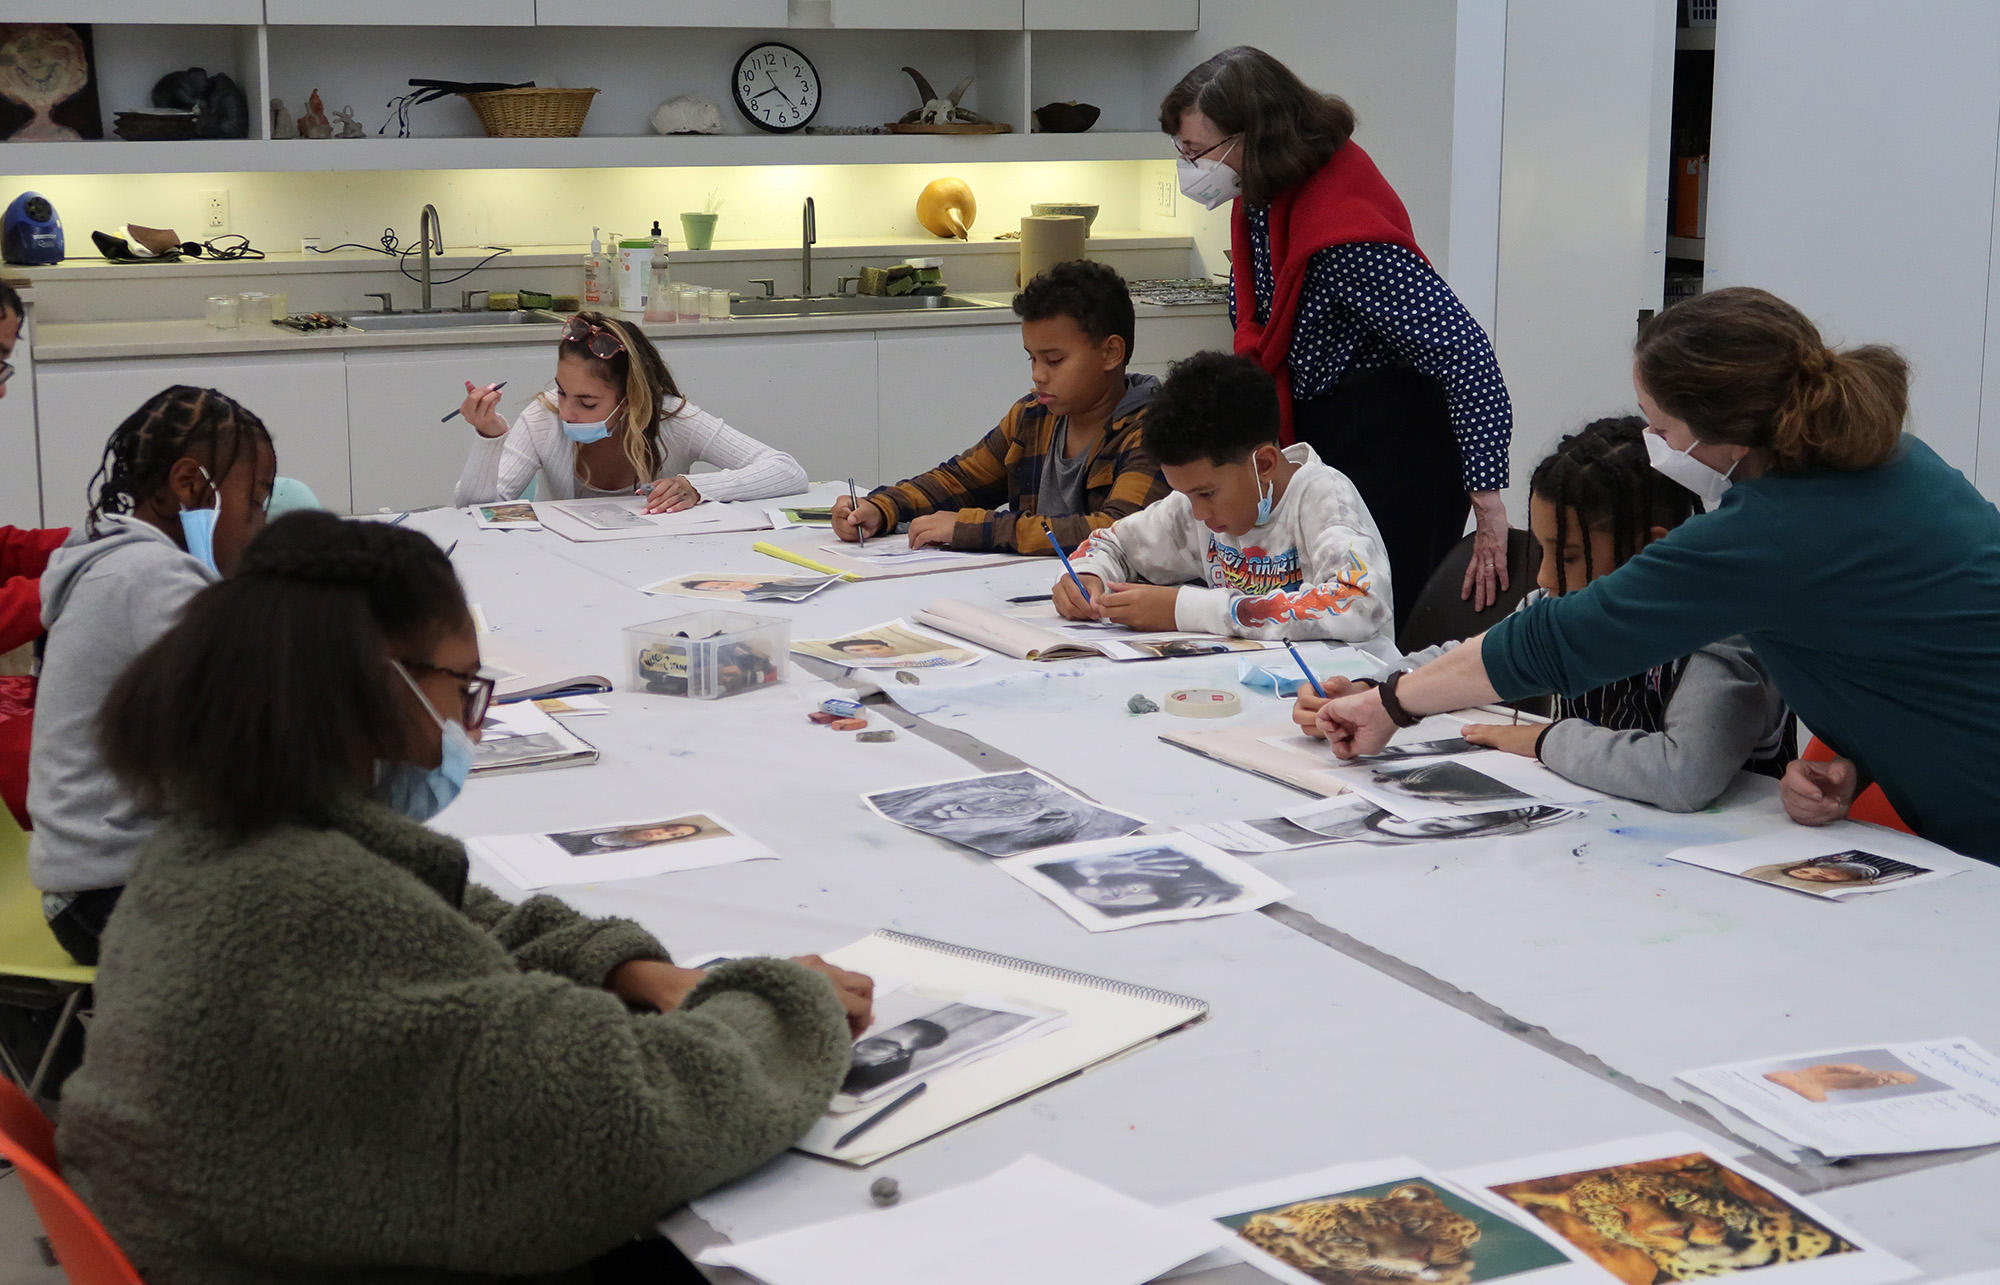 Adults lead children in an art activity around a large table